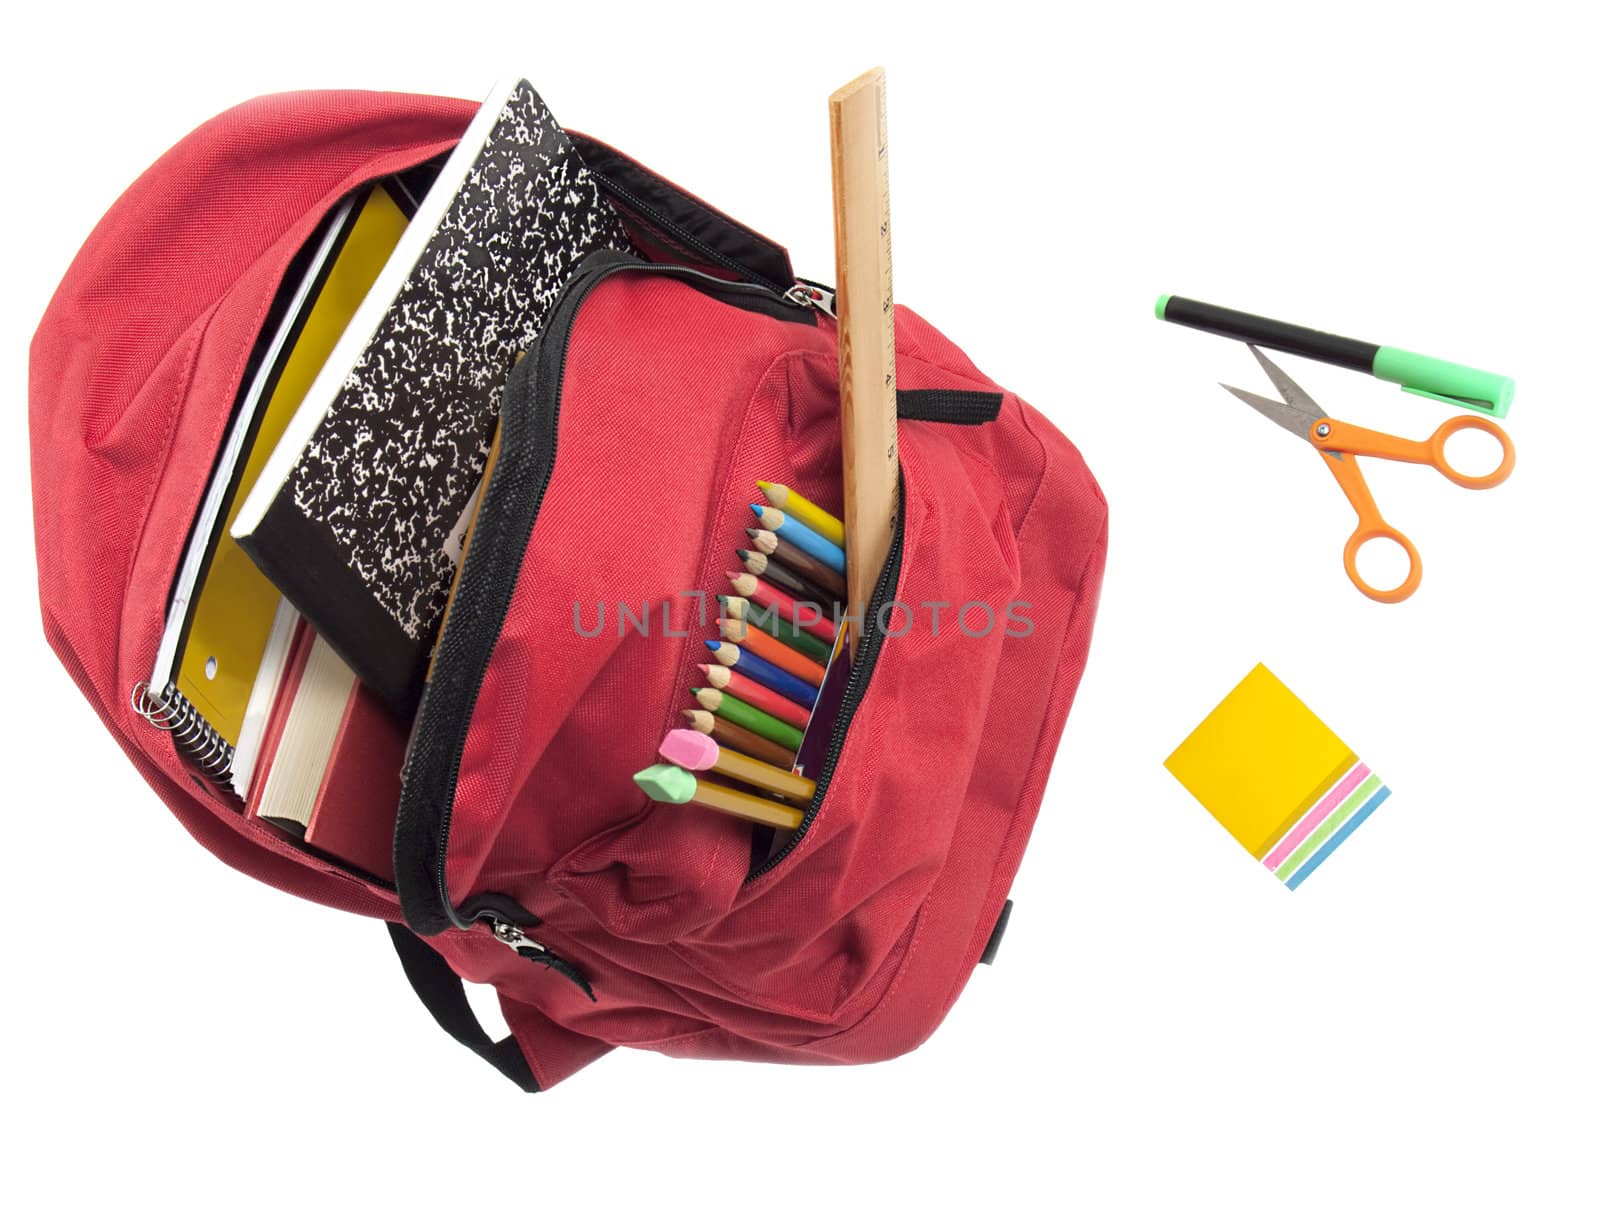 Bright red nylon backpack full of books, colored pencils, and with felt marker, sticky notes and scissors in front. All isolted on white for easy removal.